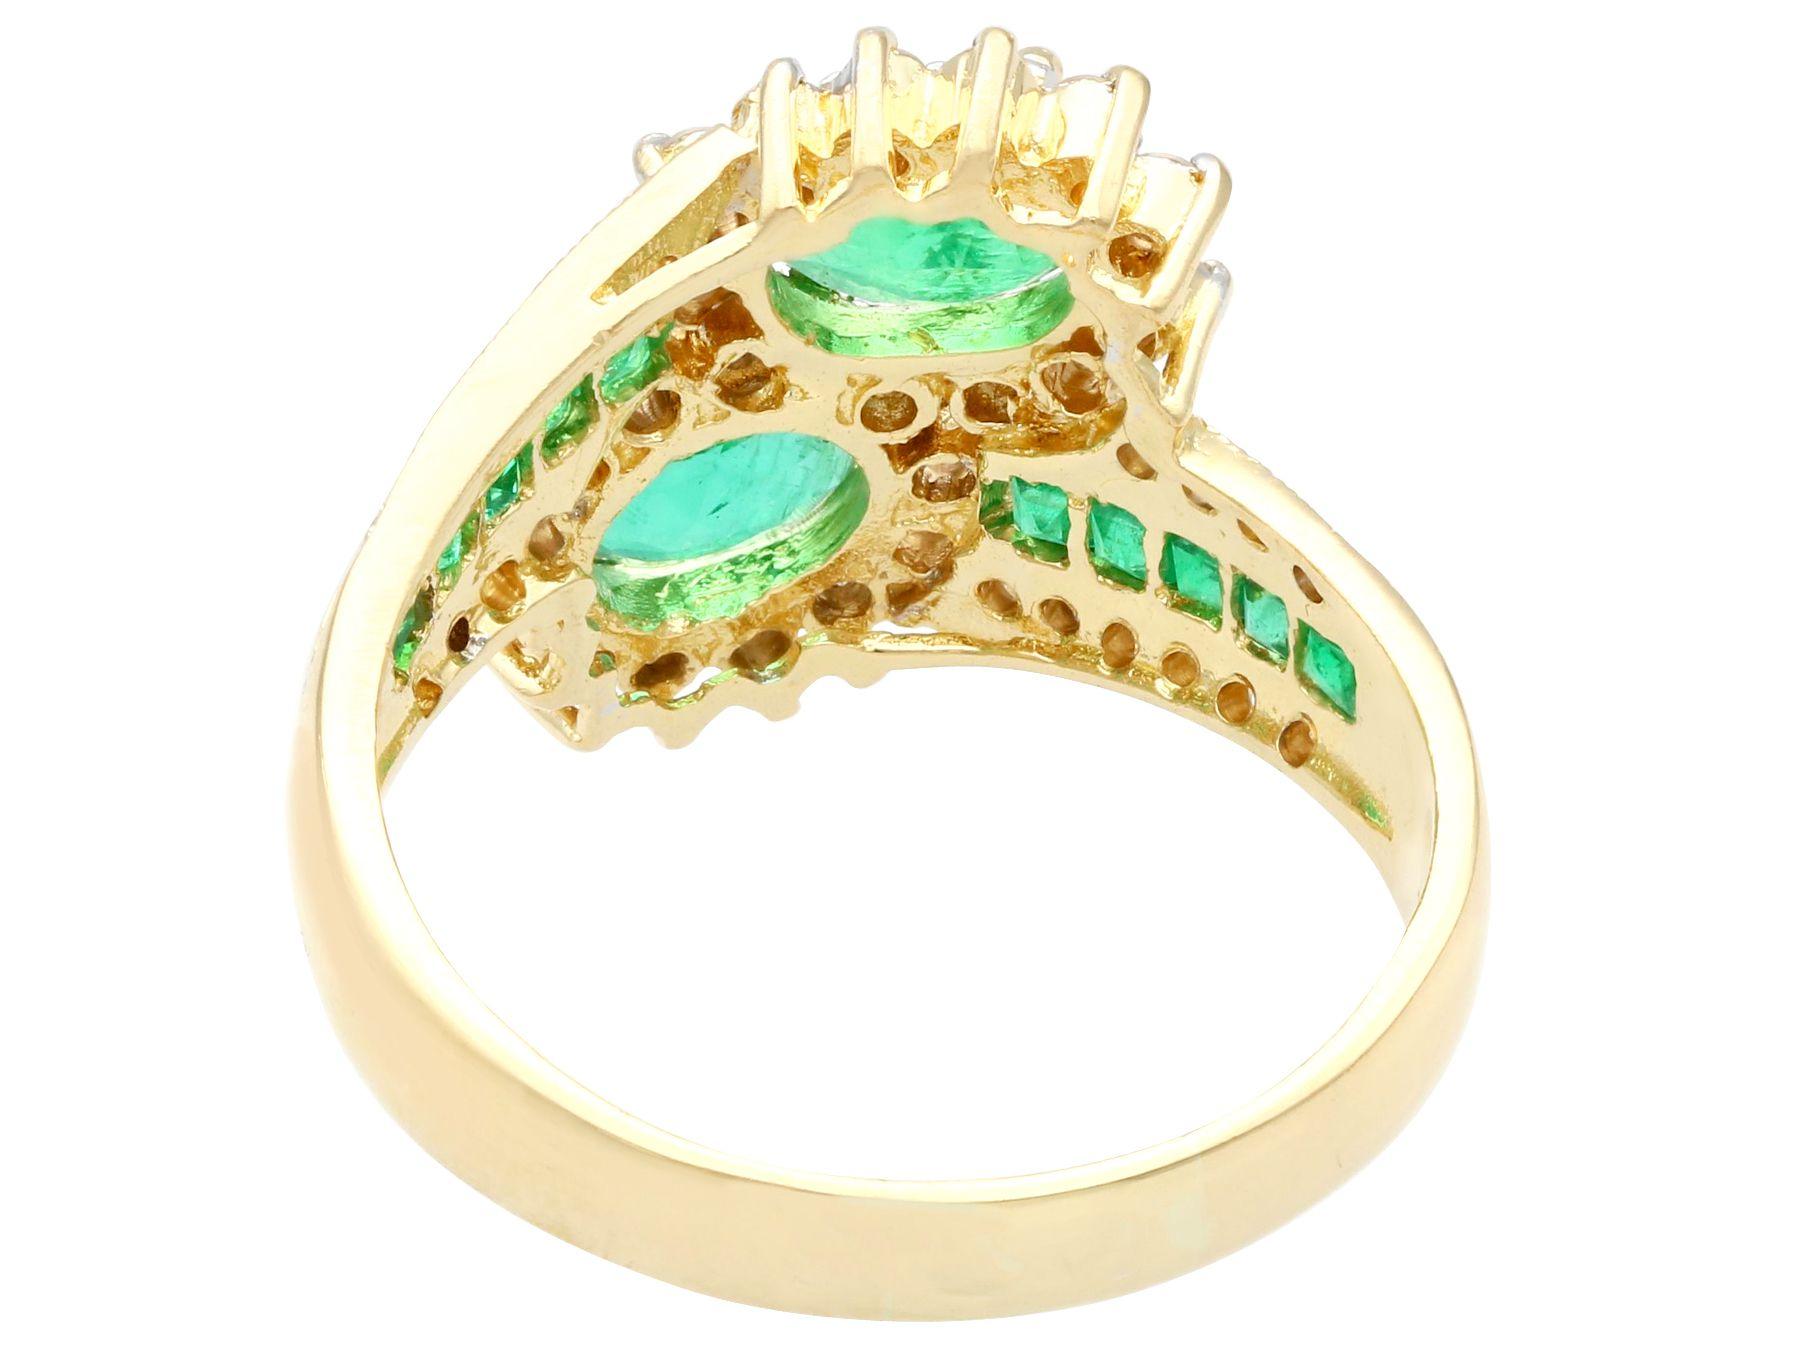 1.80 Carat Emerald and 1.05 Carat Diamond Yellow Gold Cocktail Ring In Excellent Condition For Sale In Jesmond, Newcastle Upon Tyne